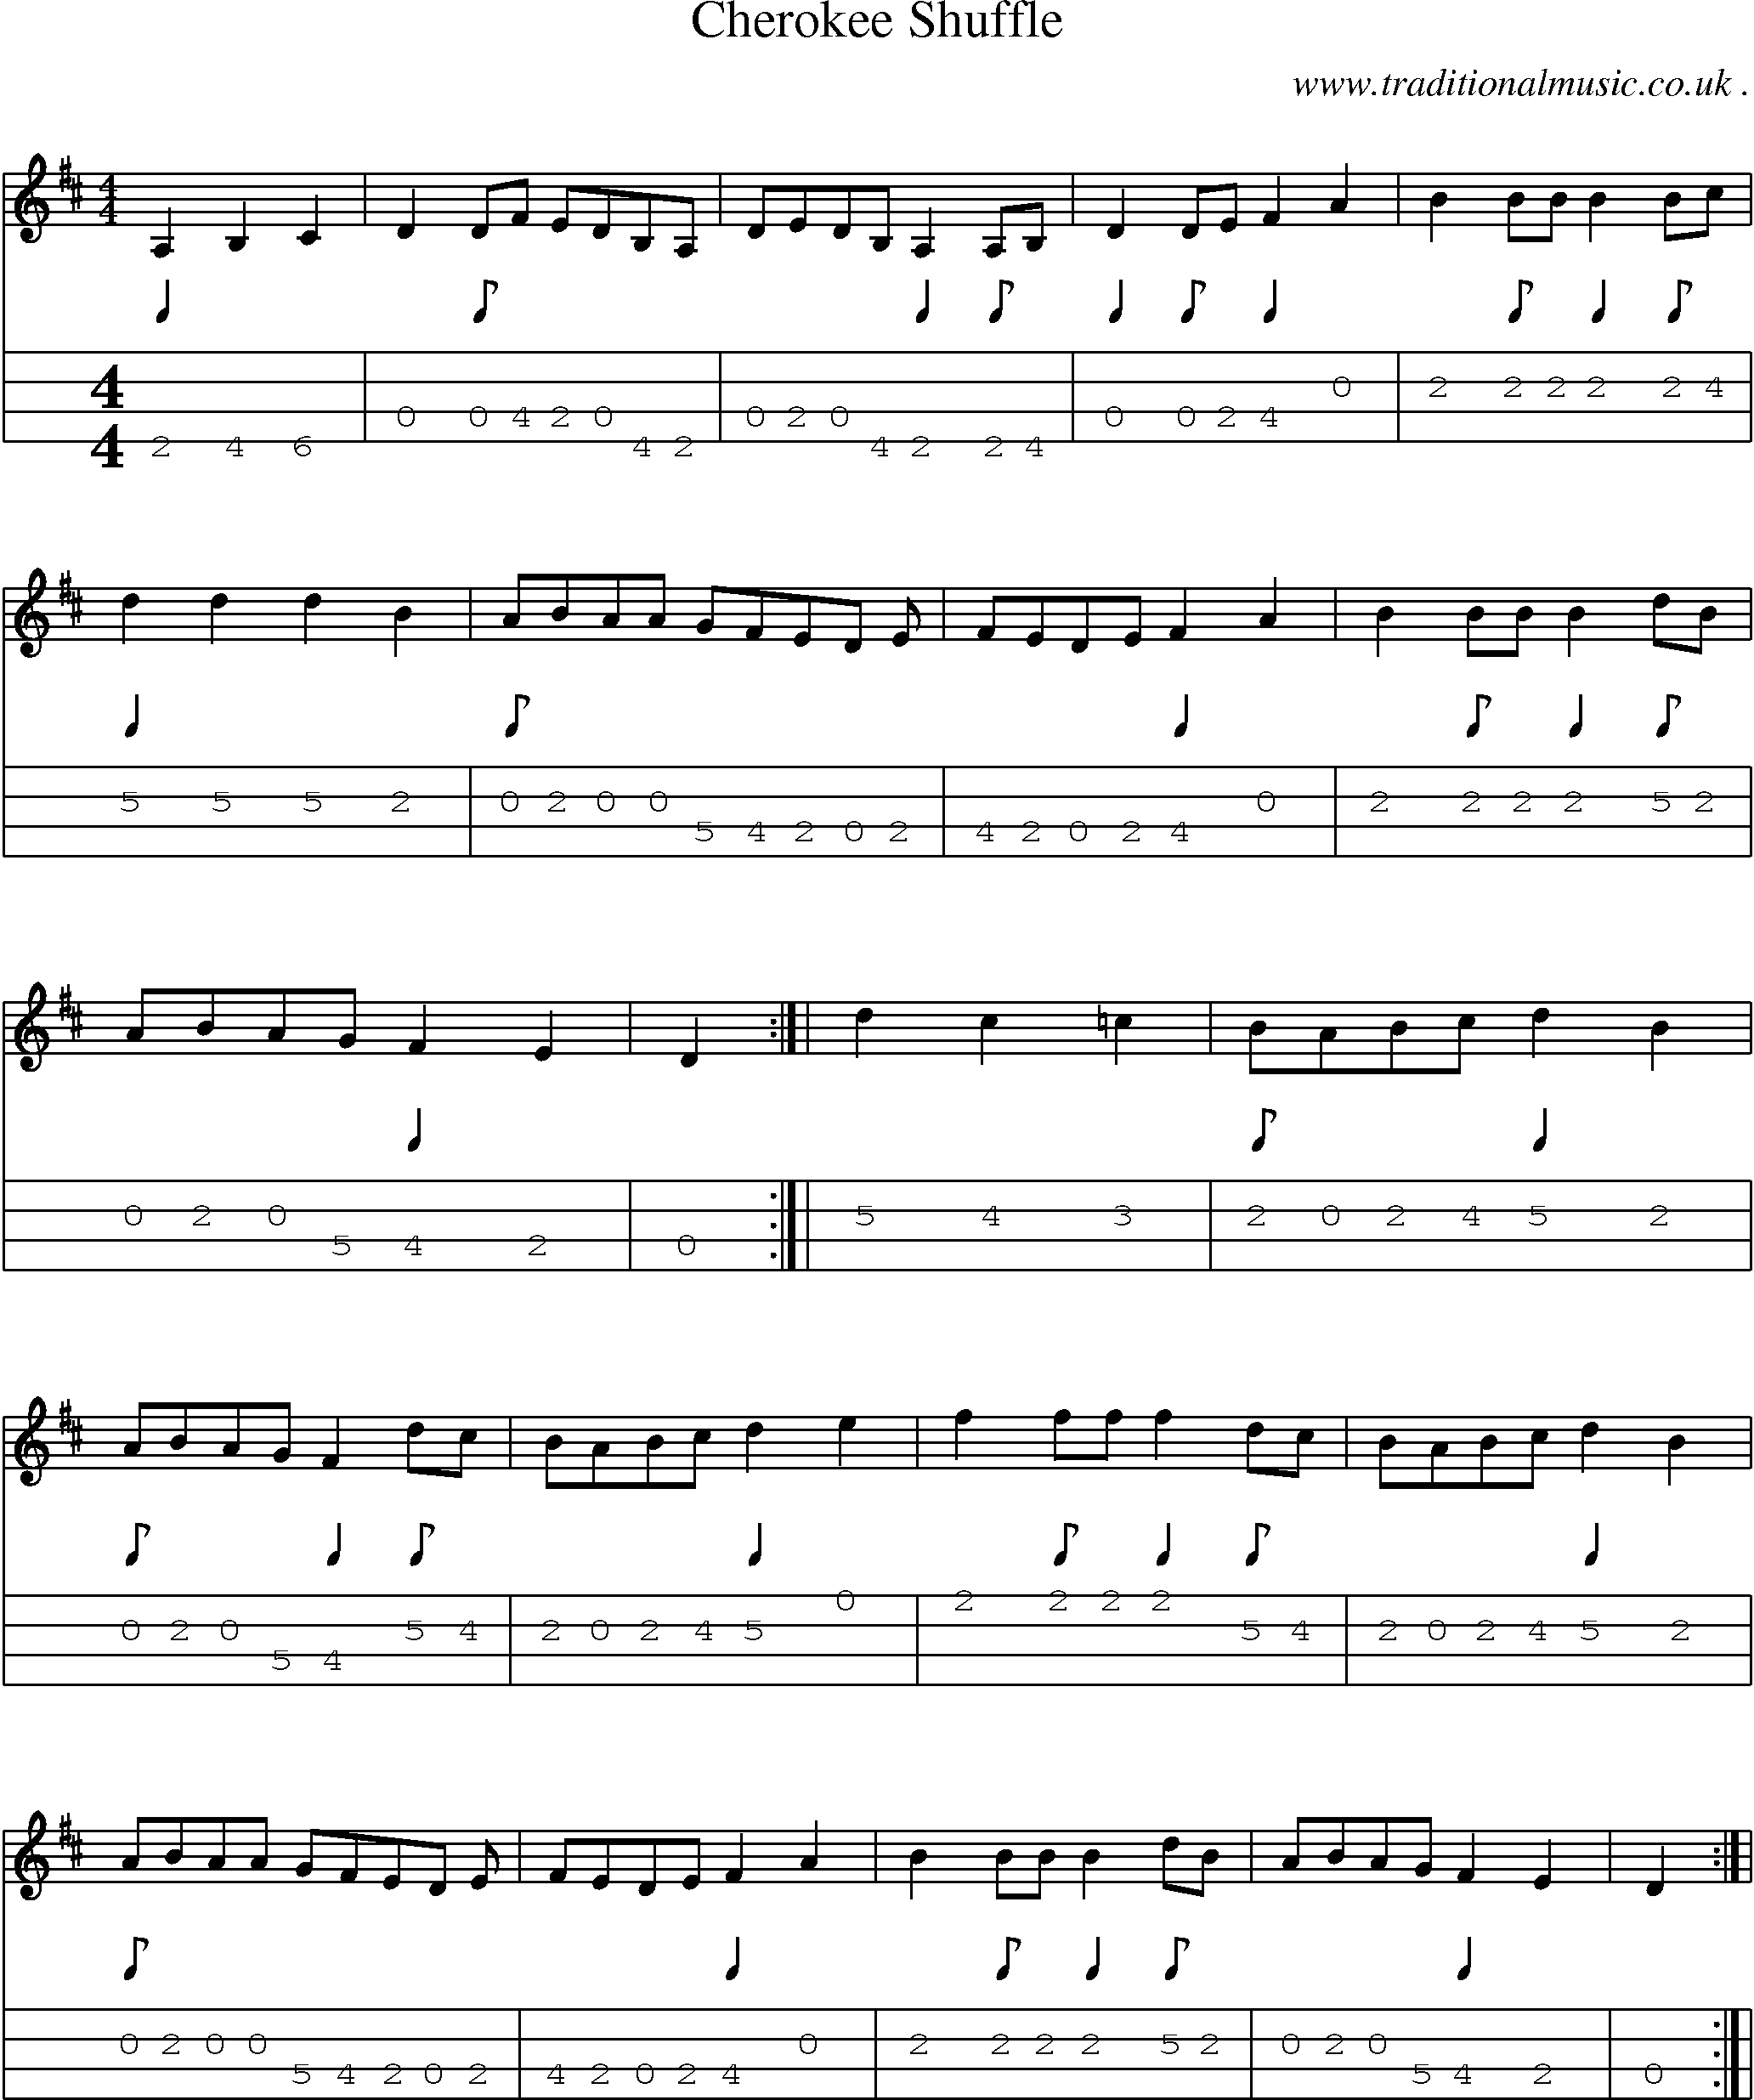 Music Score and Guitar Tabs for Cherokee Shuffle